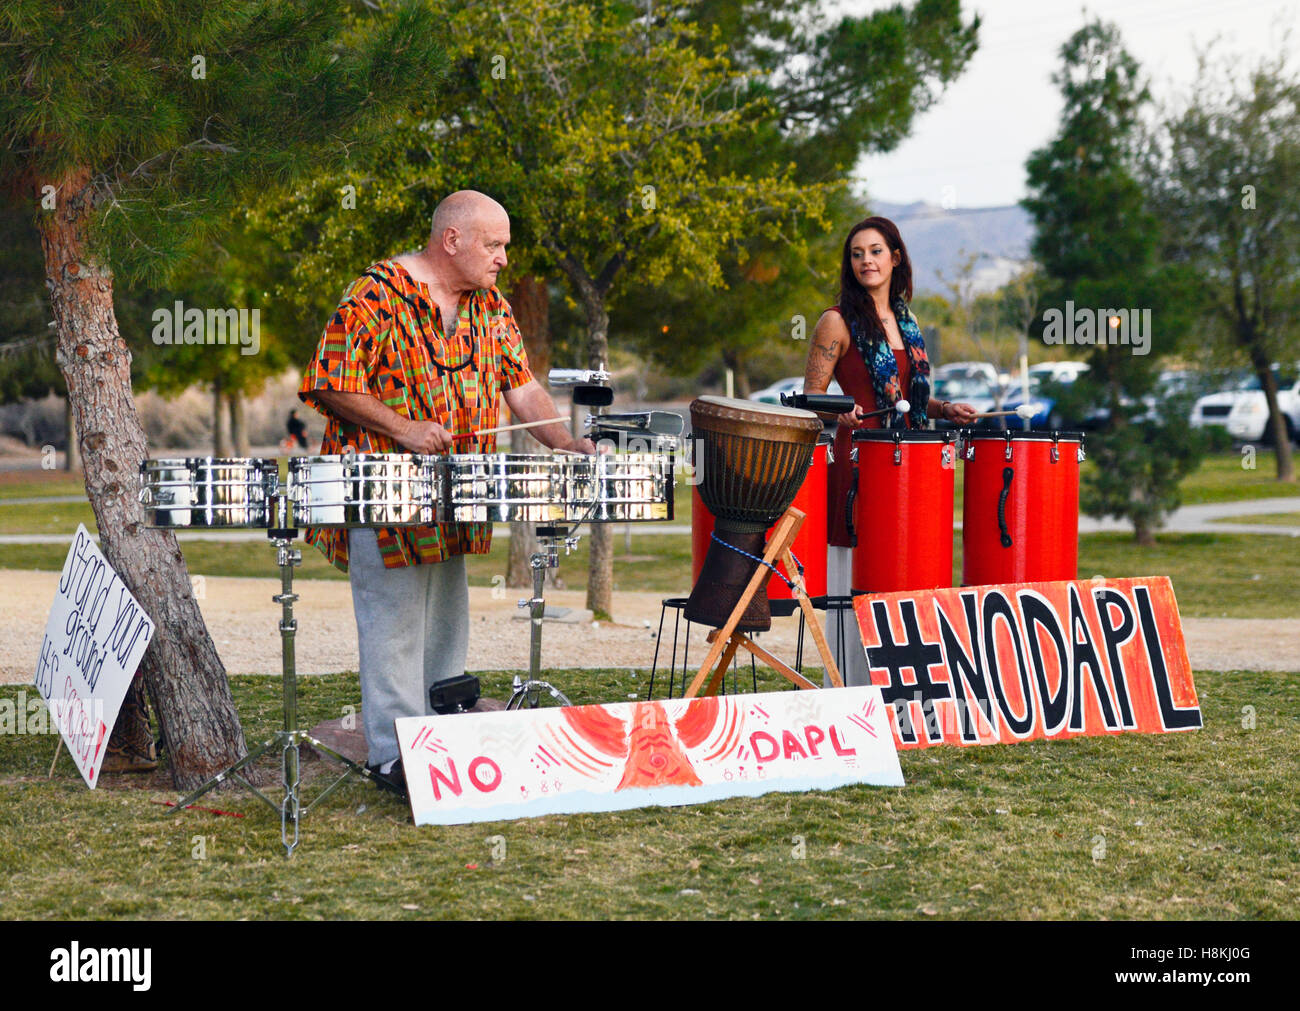 Las Vegas, USA. 13th Nov, 2016. November 13, 2016, Sunset Park Las Vegas Nevada, A drum circle forms at sunset in support of 'Standing Rock' defending the Native American tribal lands from the construction of the 'Dakota Access Pipe Line'. #NODAPL Credit:  Ken Howard/Alamy Live News Stock Photo